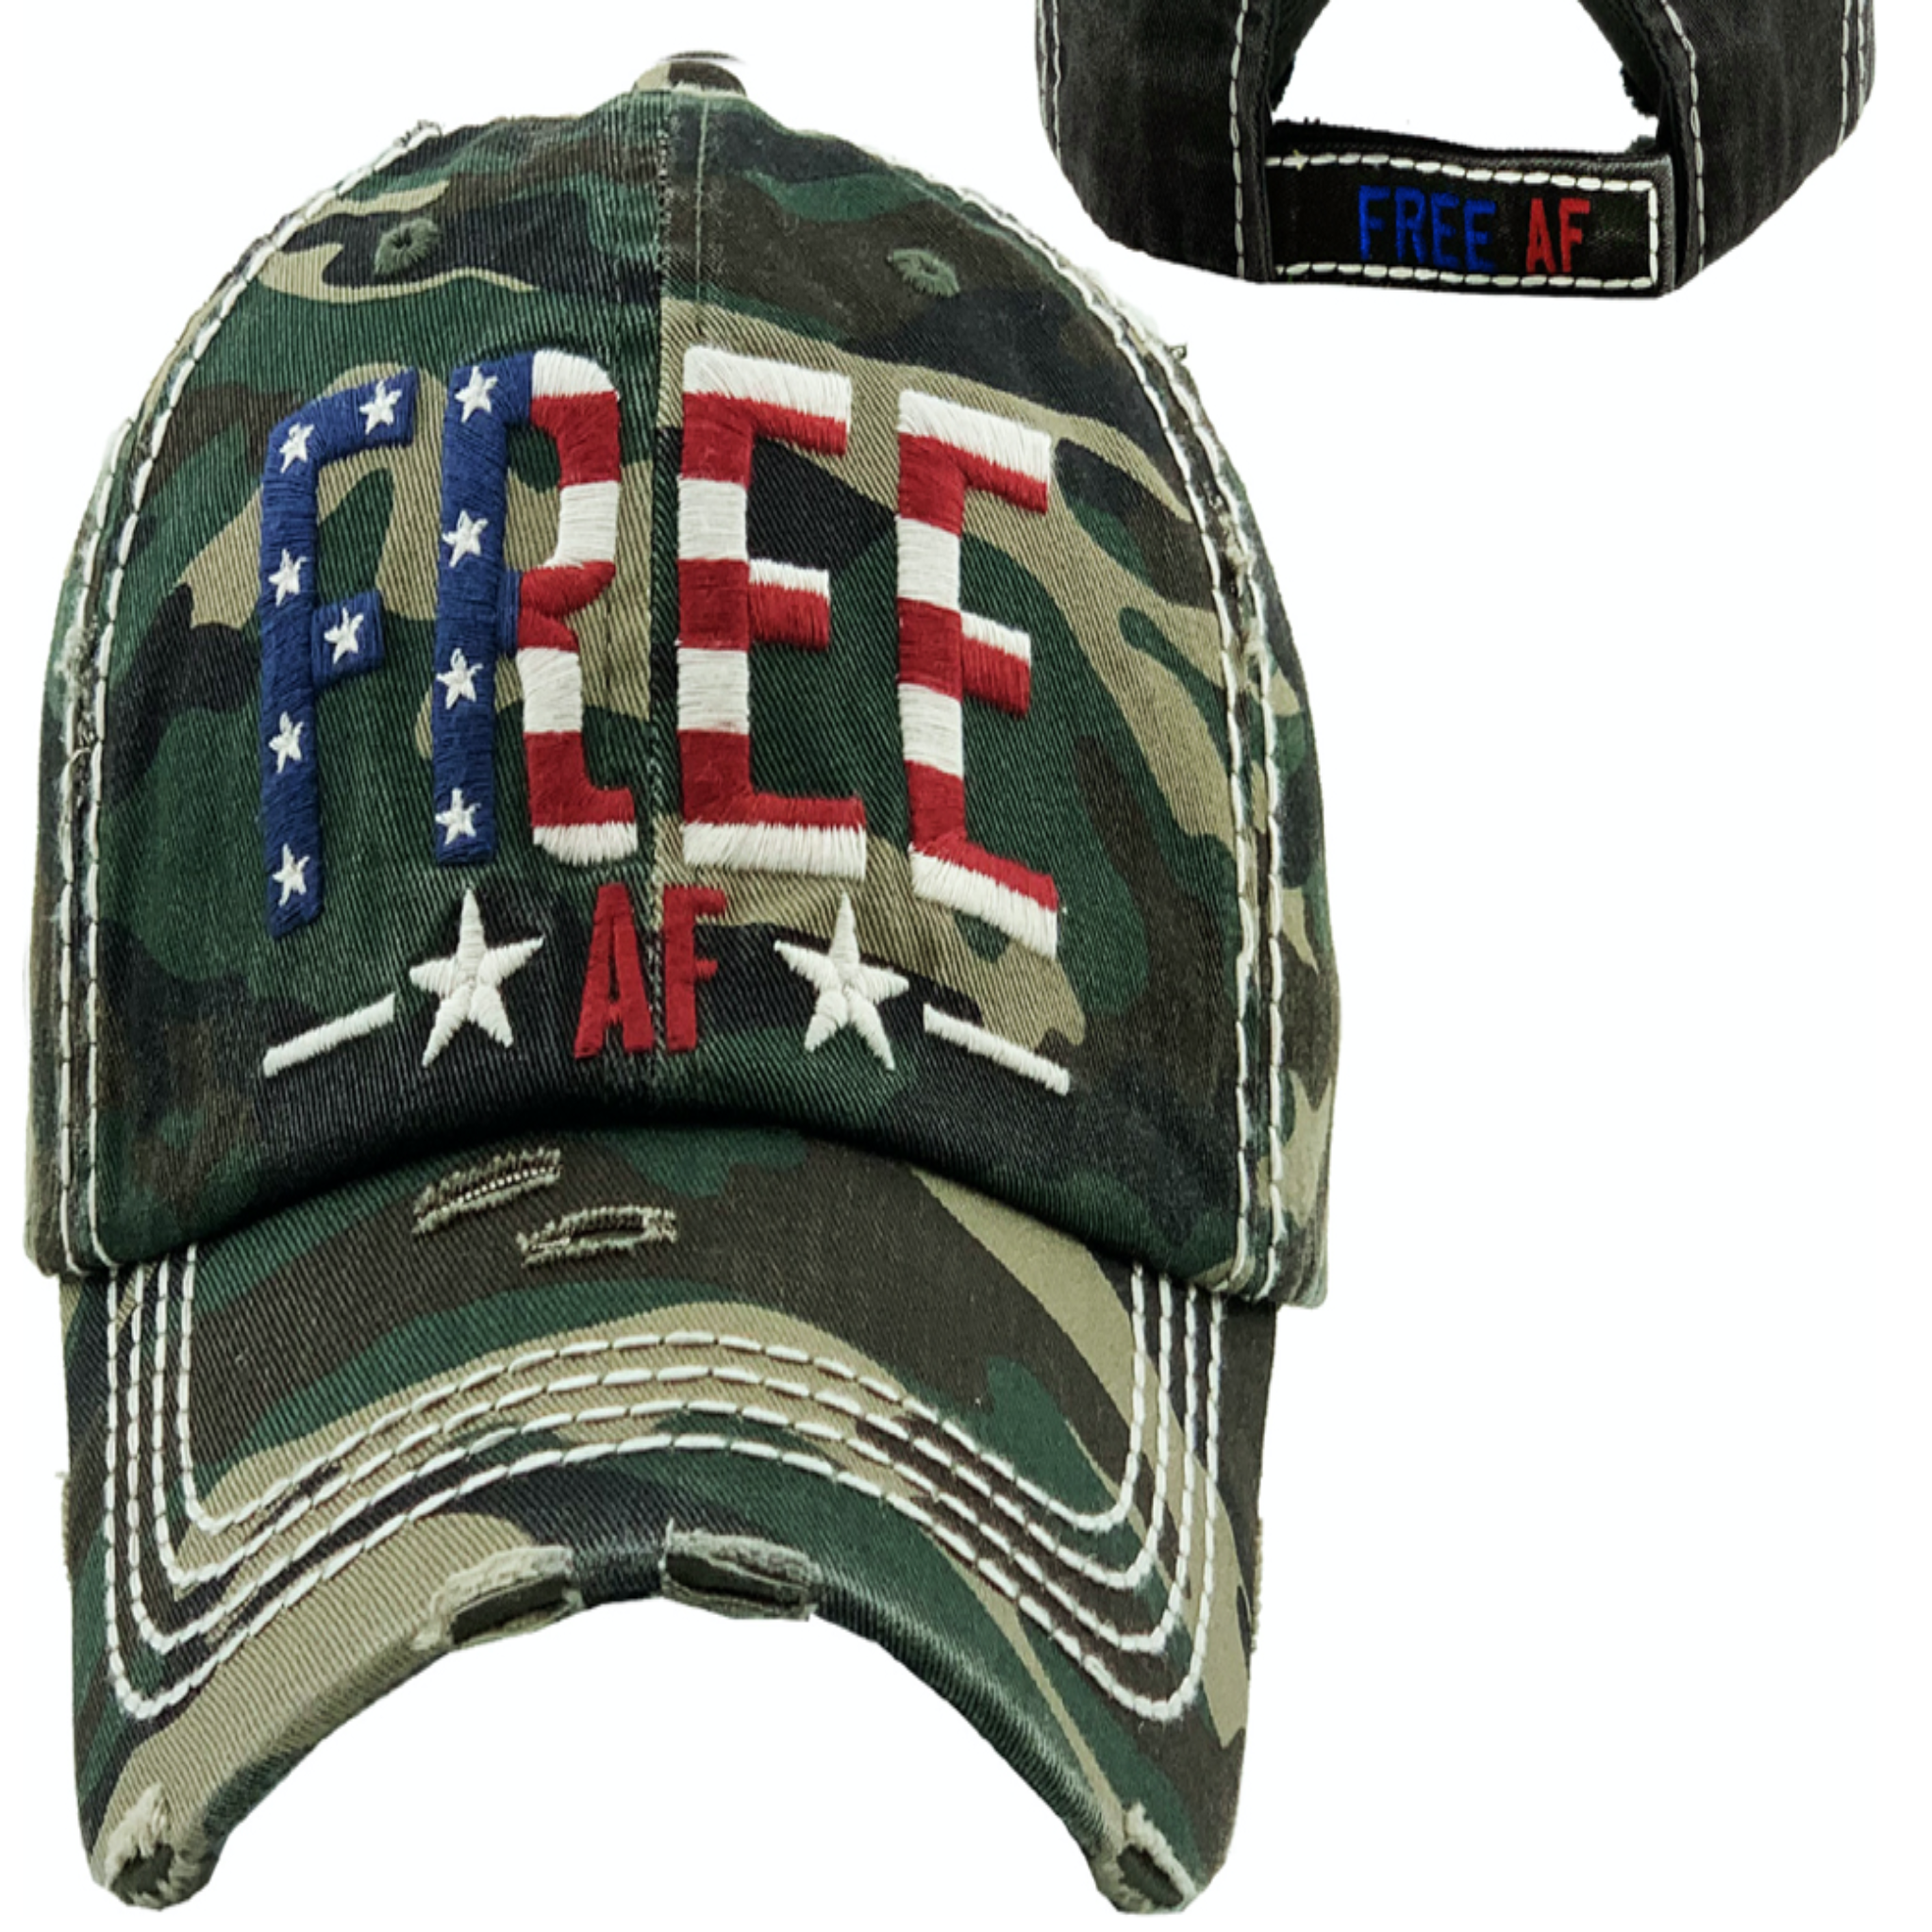 Caps and Hats and Visors